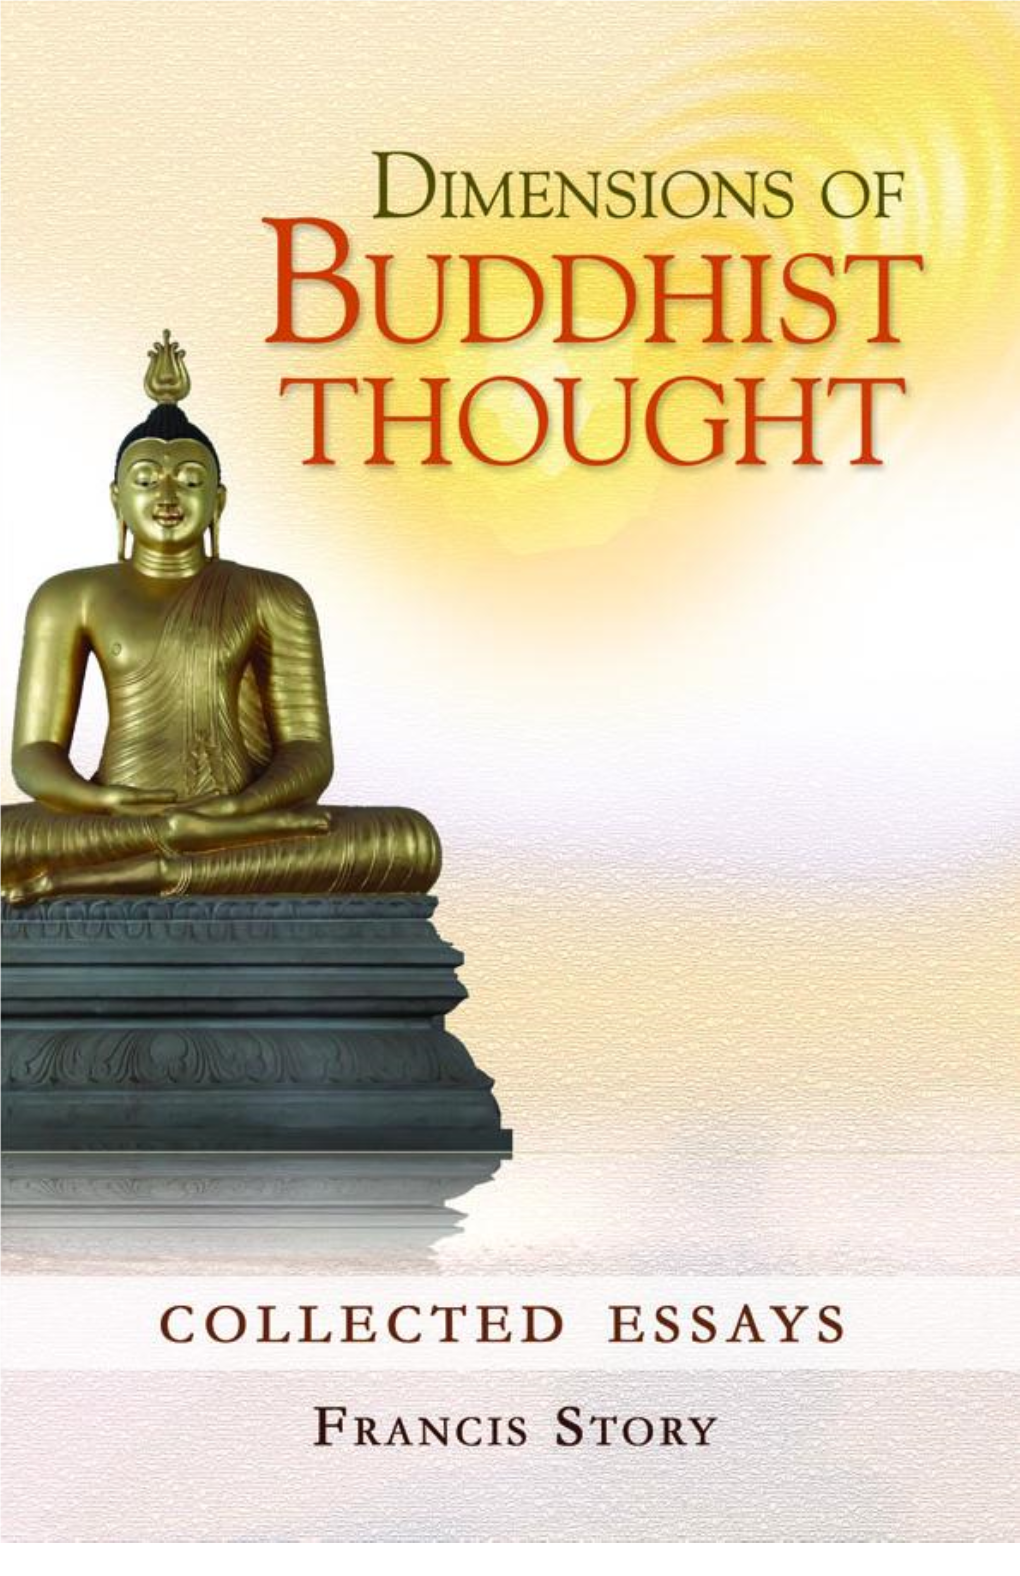 Dimensions of Buddhist Thought: Essays and Dialogues / Francis Story.- Kandy: Buddhist Publication Society Inc., 2011 BP 403S.- 394P.; 22Cm